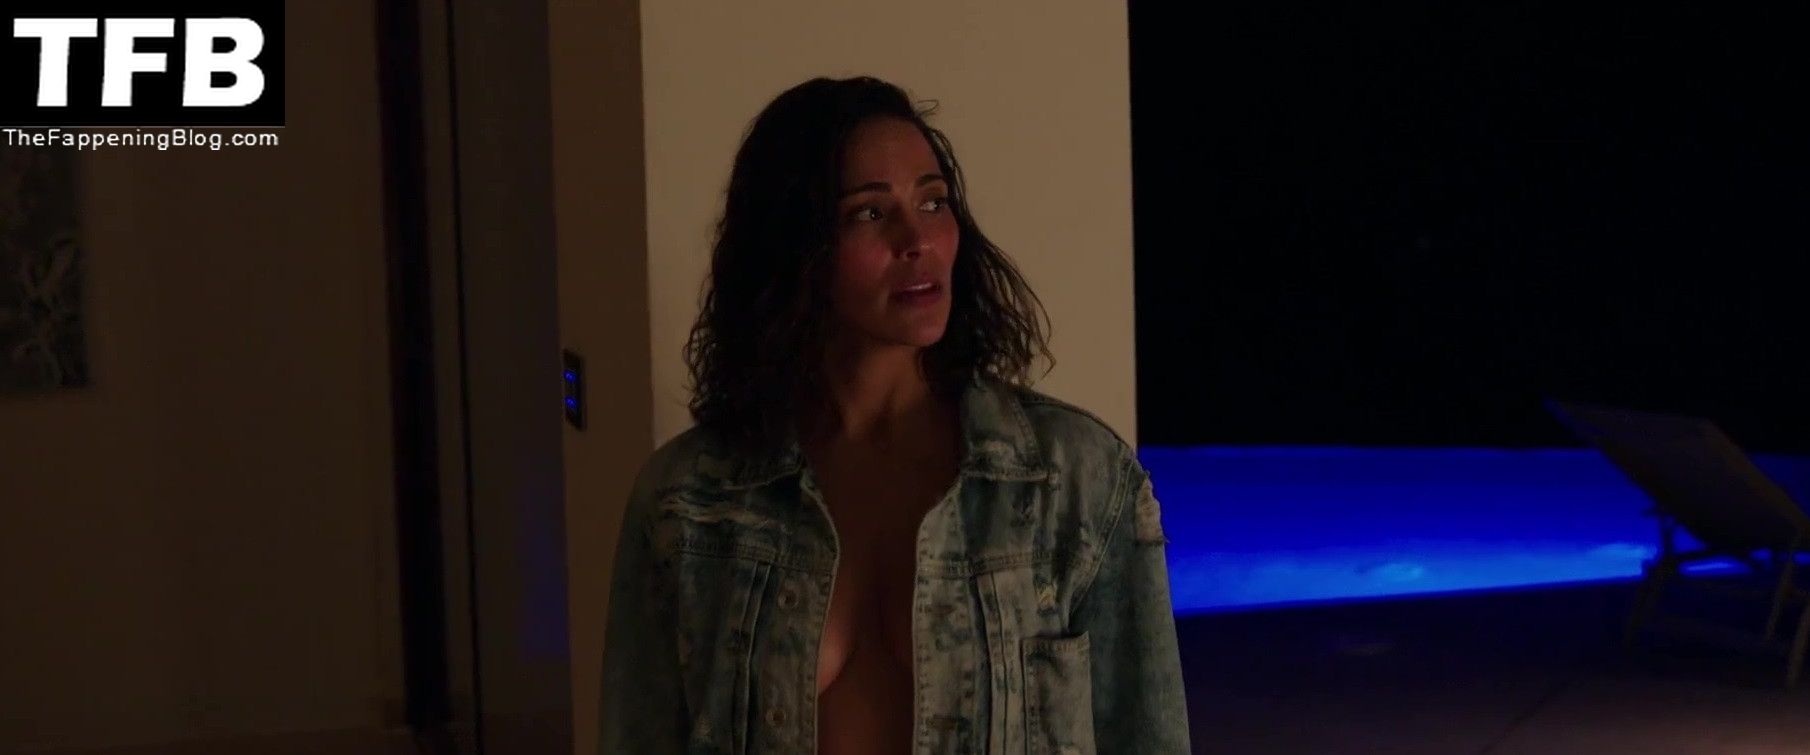 Paula Patton Nude, Topless & Sexy (160 Photos + Video Sex Scenes Compilation) [Updated]